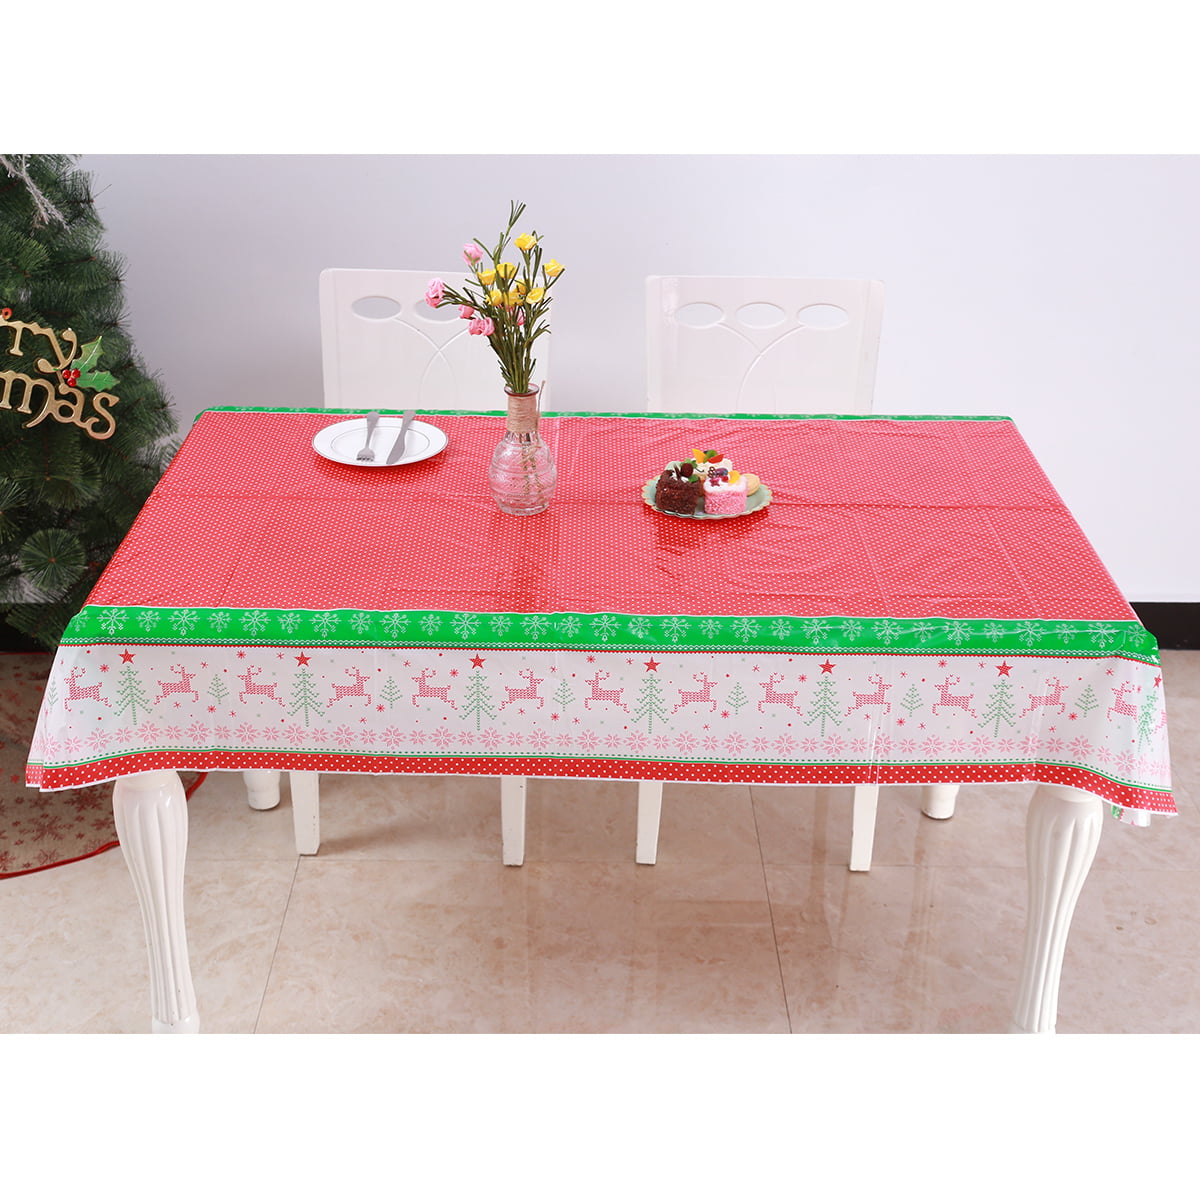 Latte Oval Table Runner Surface Protectors Easy Wipe Clean. 